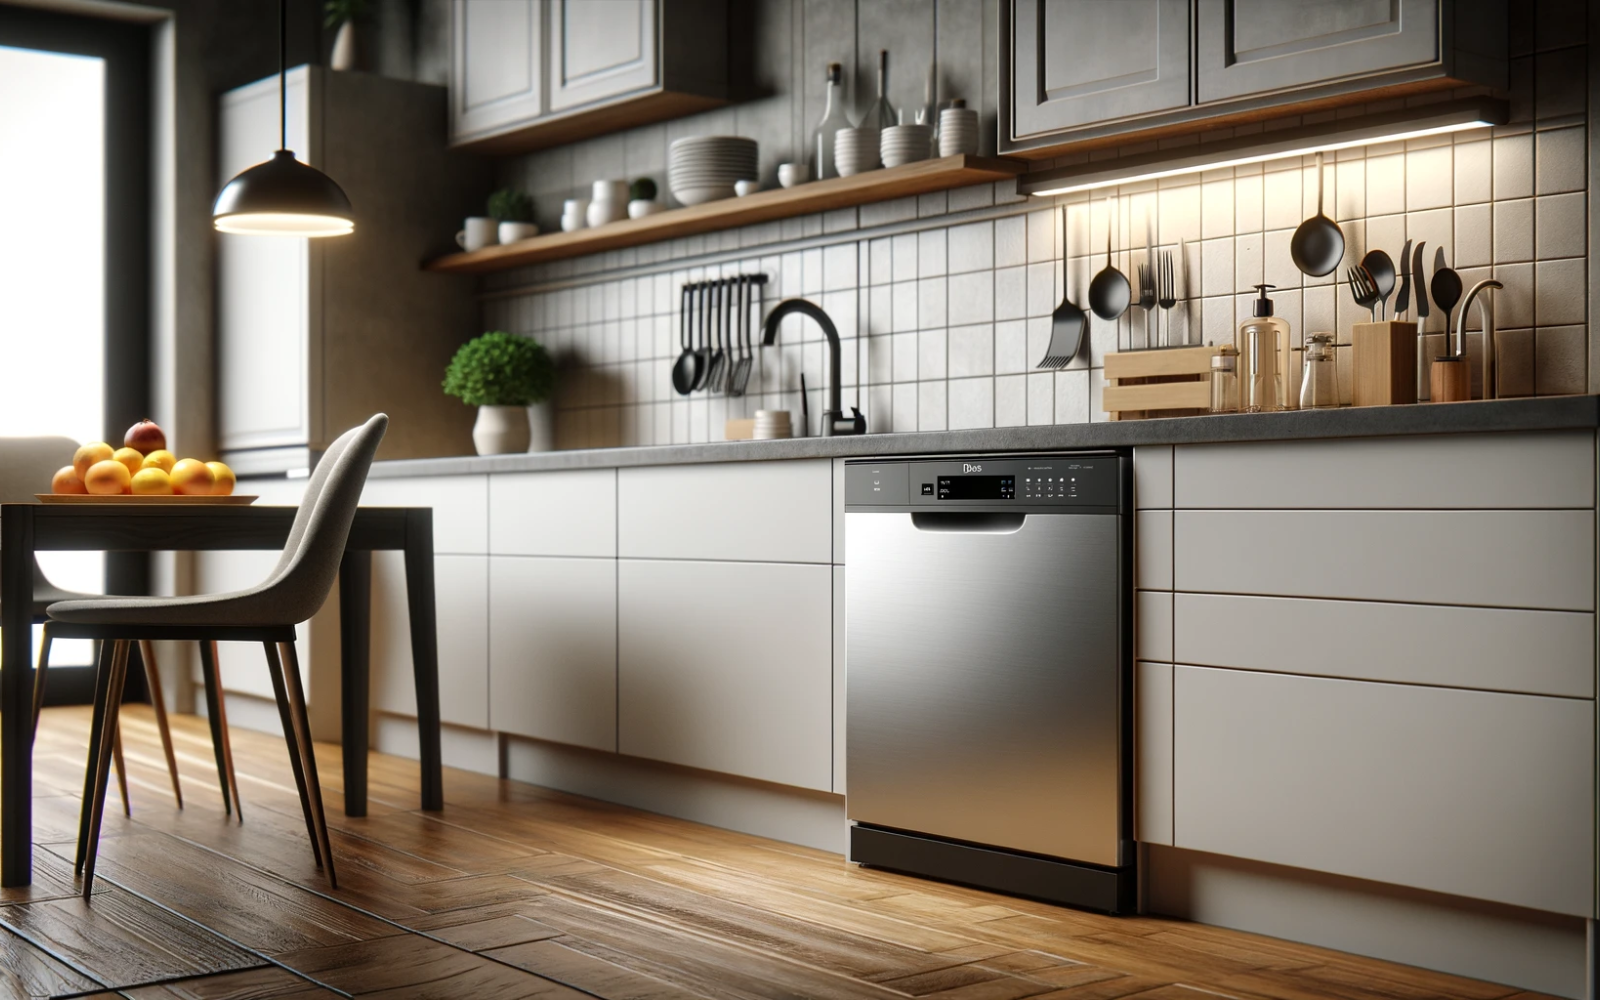 A sleek dishwasher in a contemporary, clean kitchen